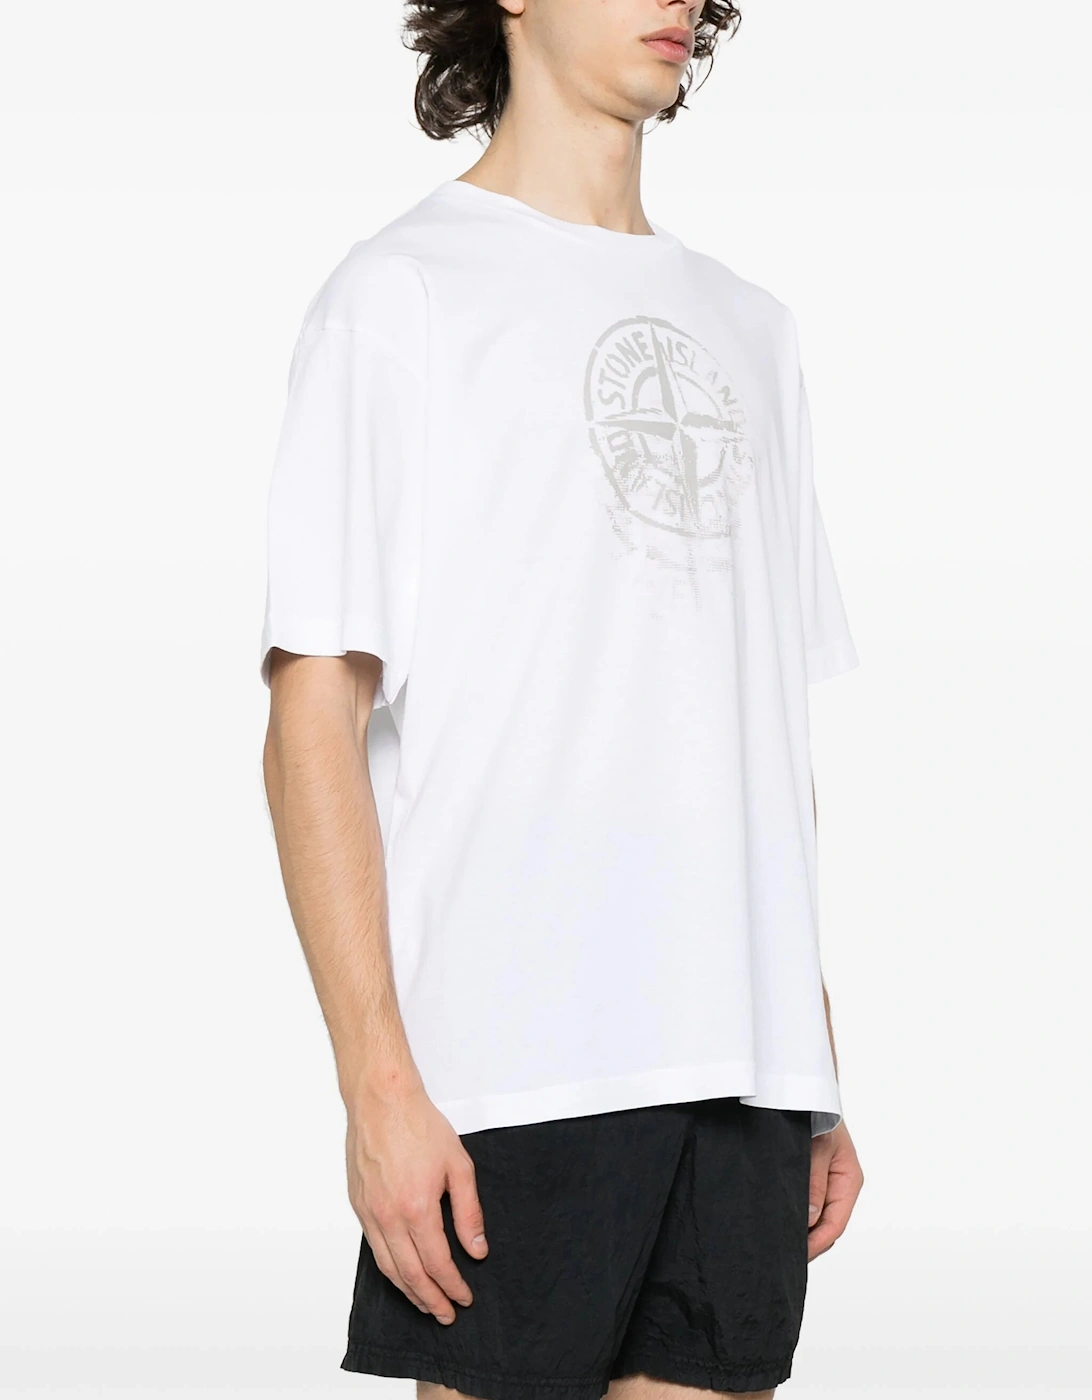 Reflective One Compass Print Logo T-Shirt in White